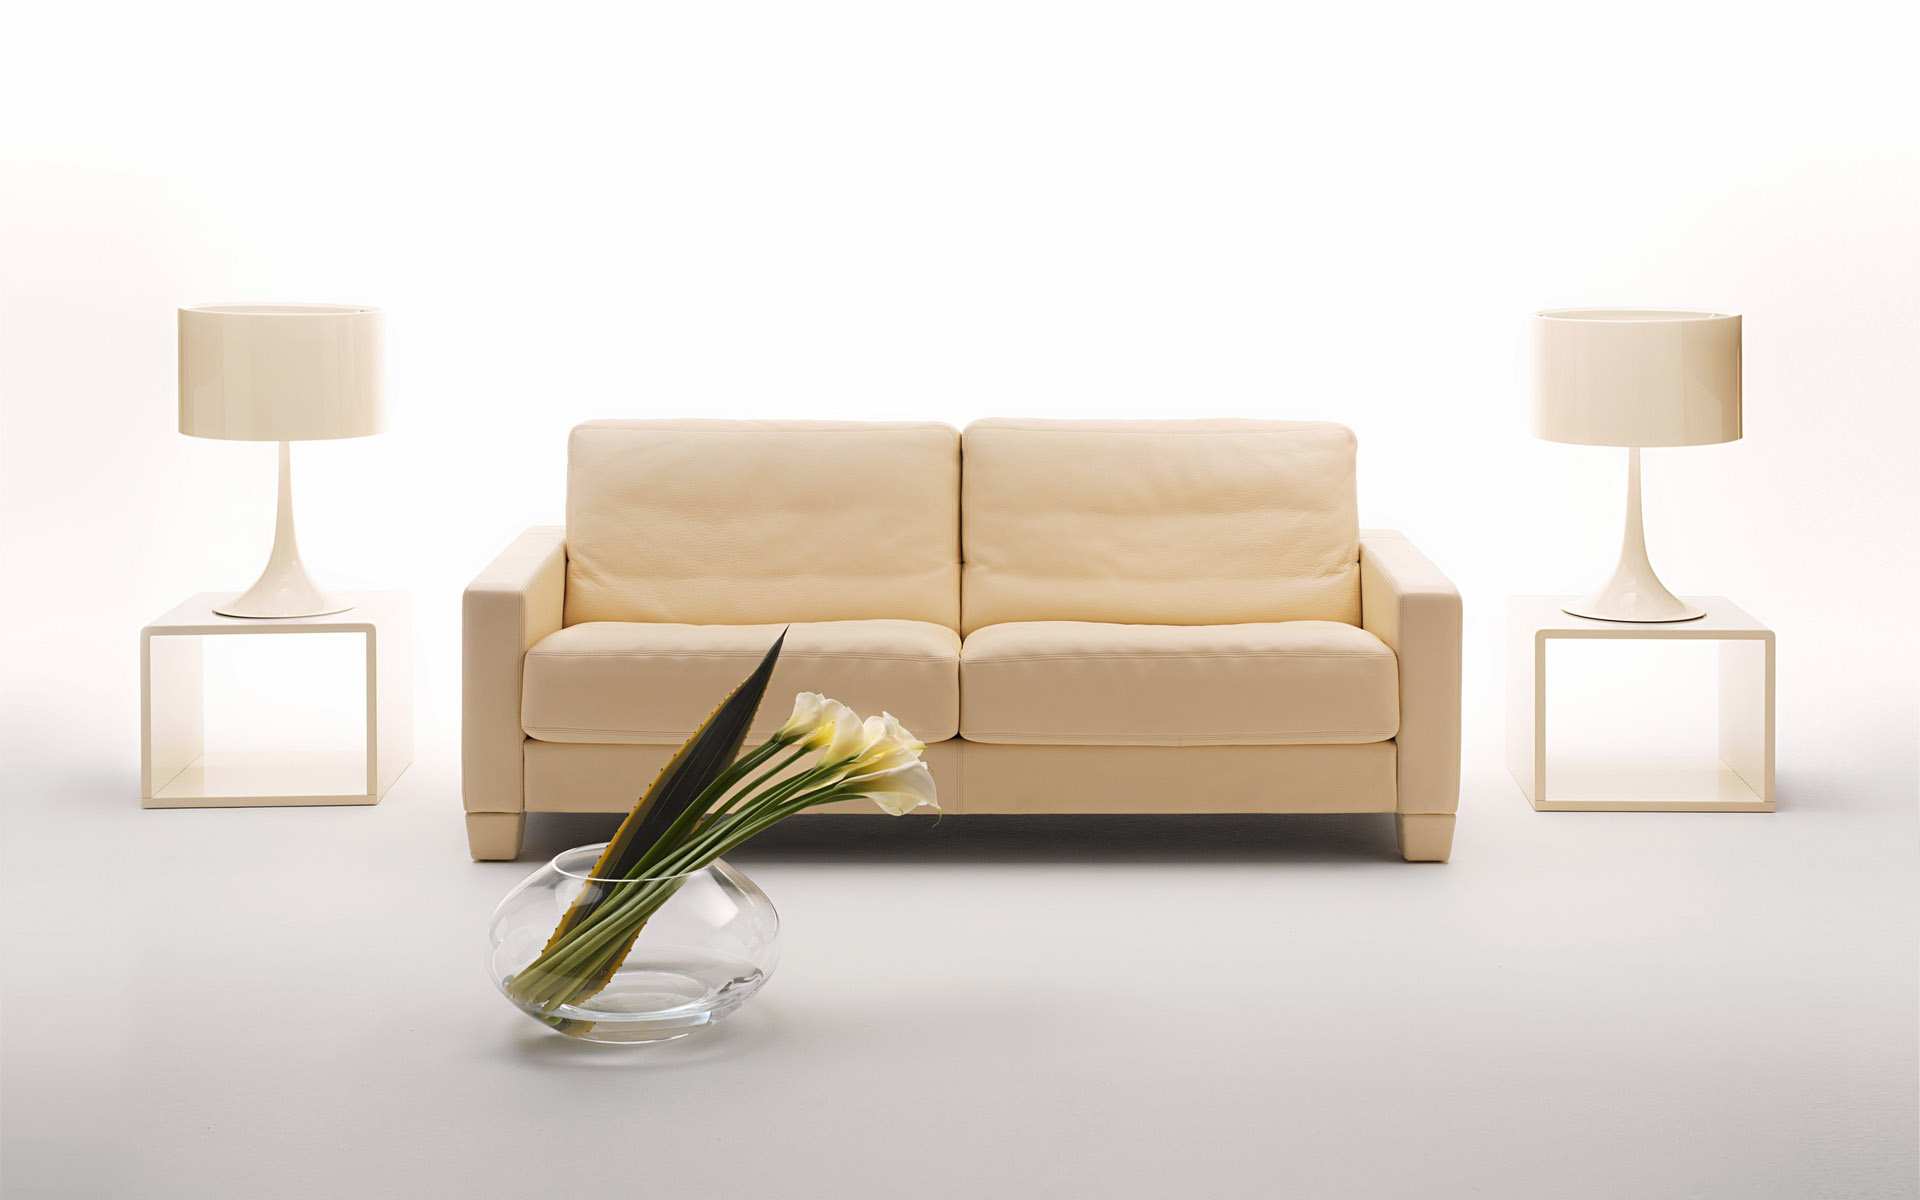 Minimalist Modern Best Stunning Minimalist Modern Style White Best Sofa Design Ideas With Fancy Sideboars And Table Lamps Glass Floral Vase Furniture  Best Sofas Choice For Your Beautiful Room 